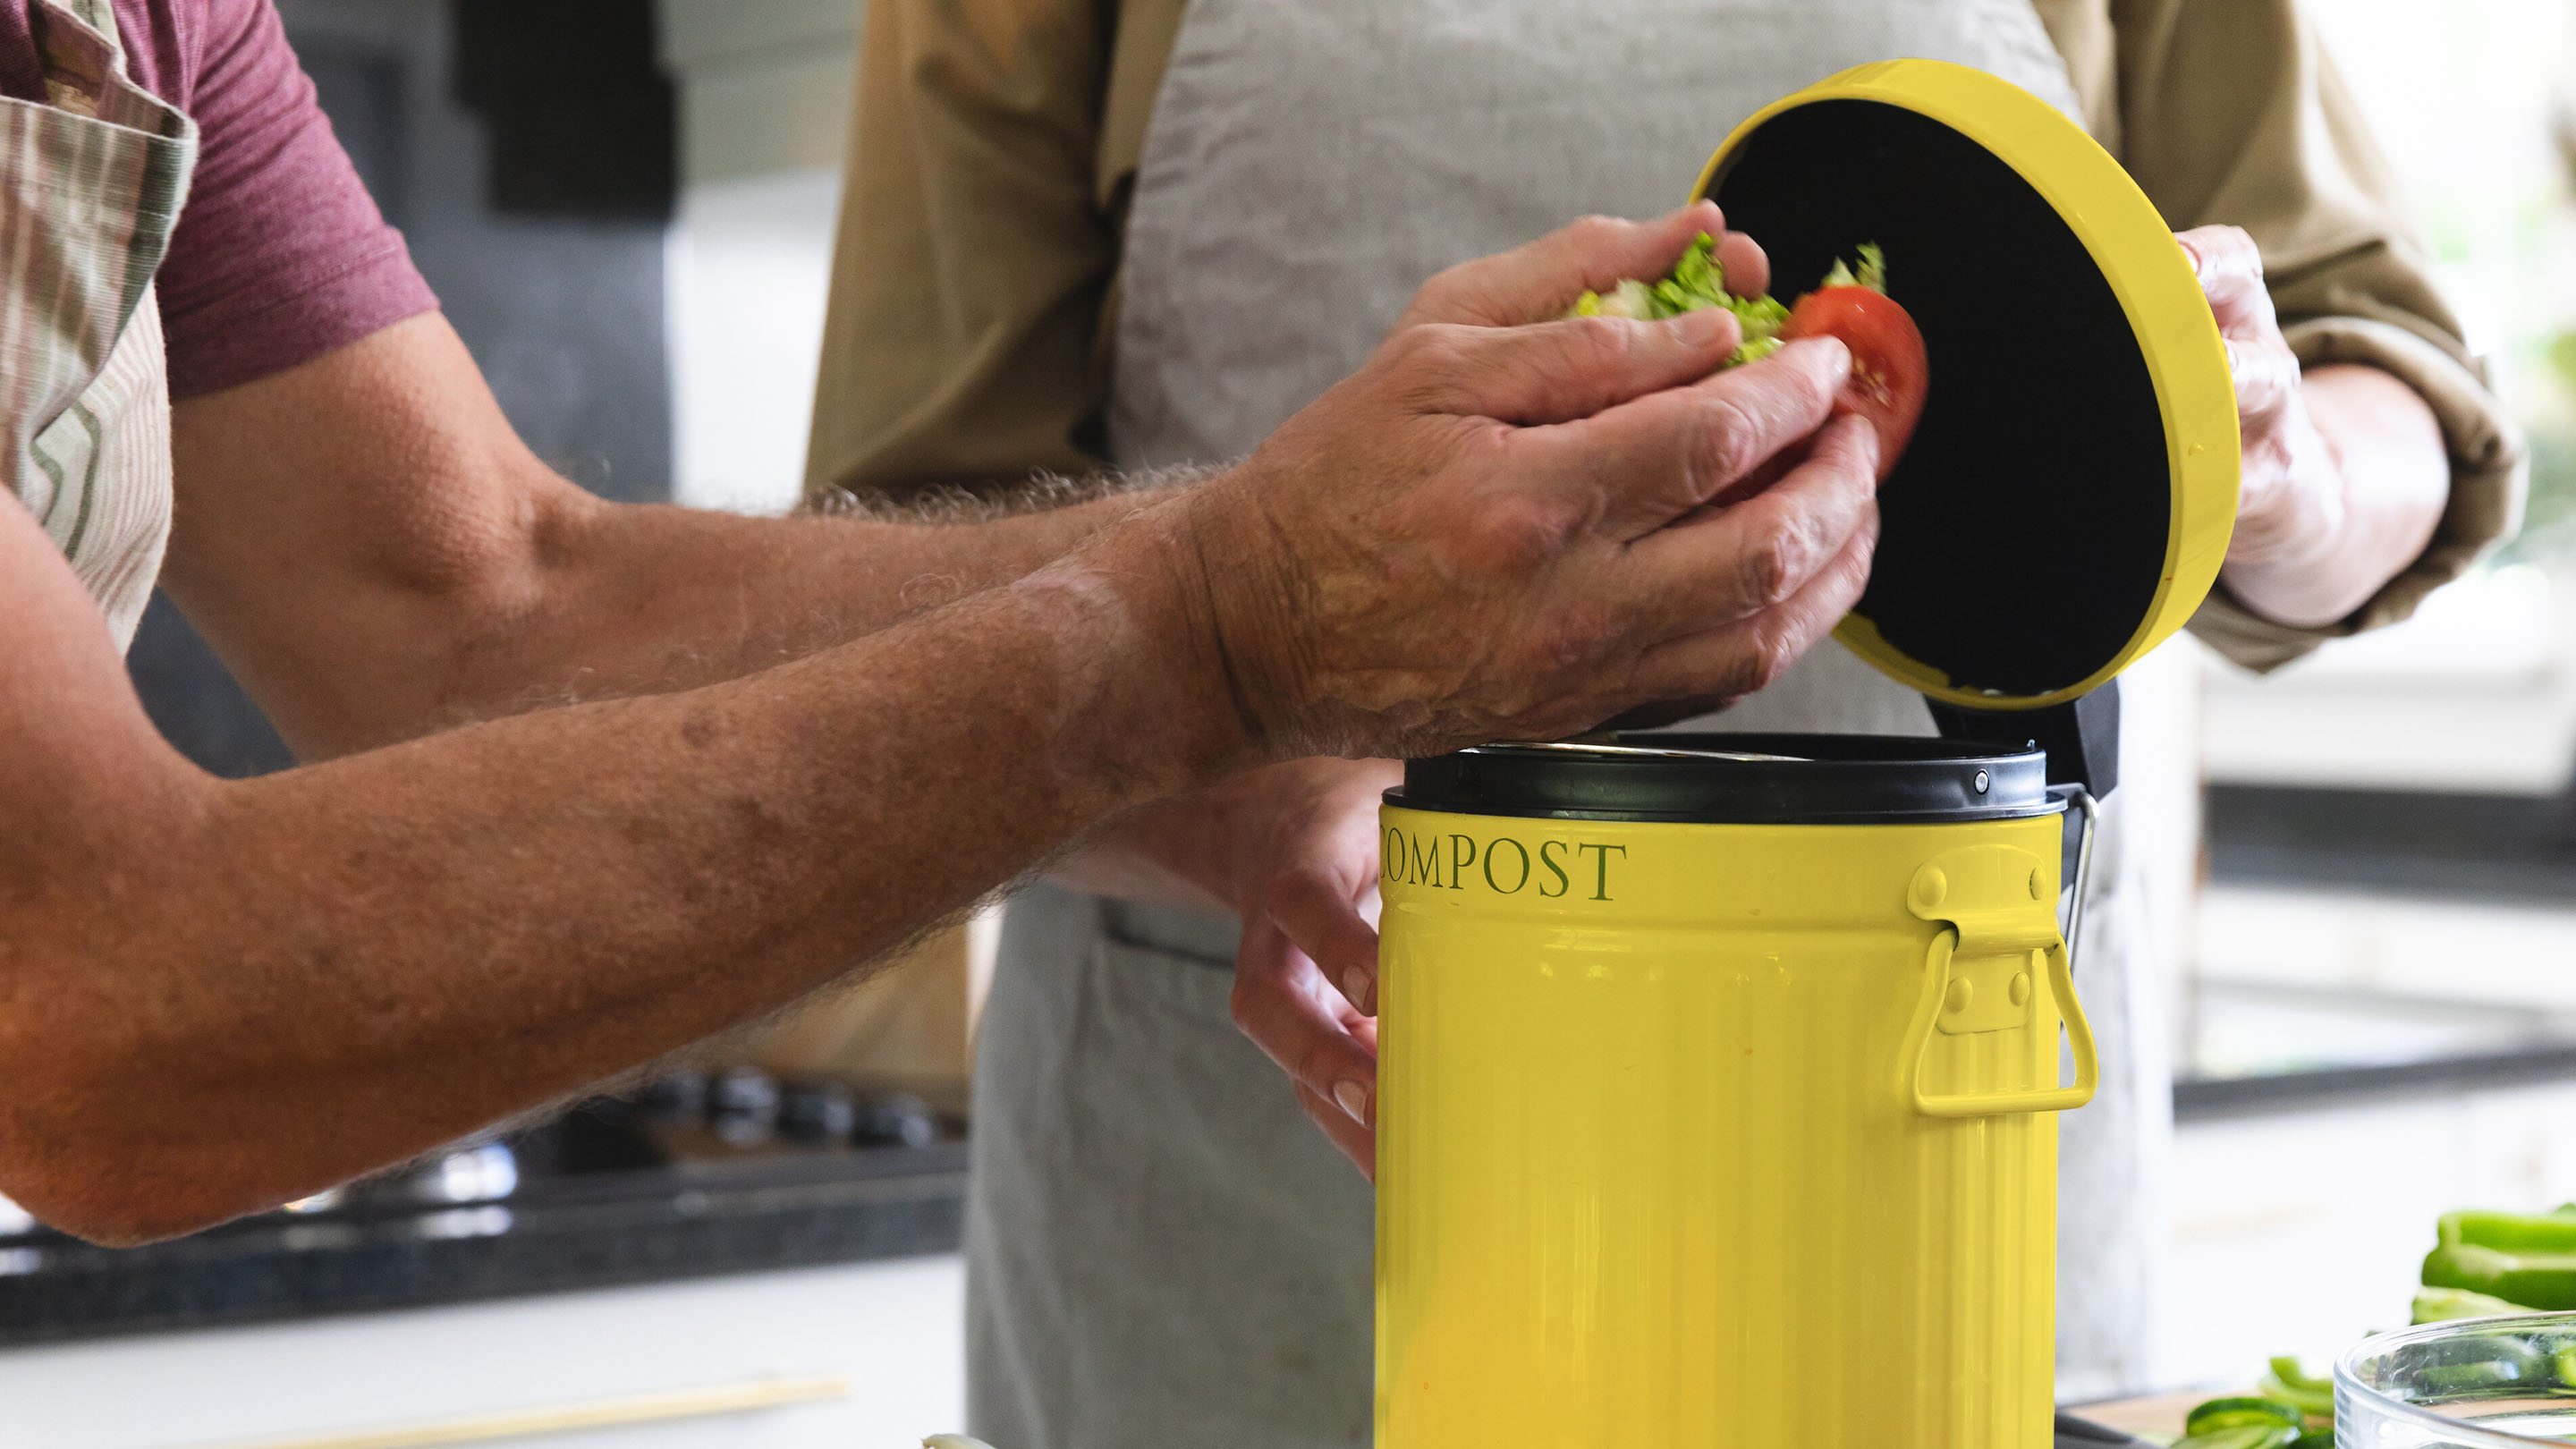 Person placing food waste into a yellow compost bin in a kitchen